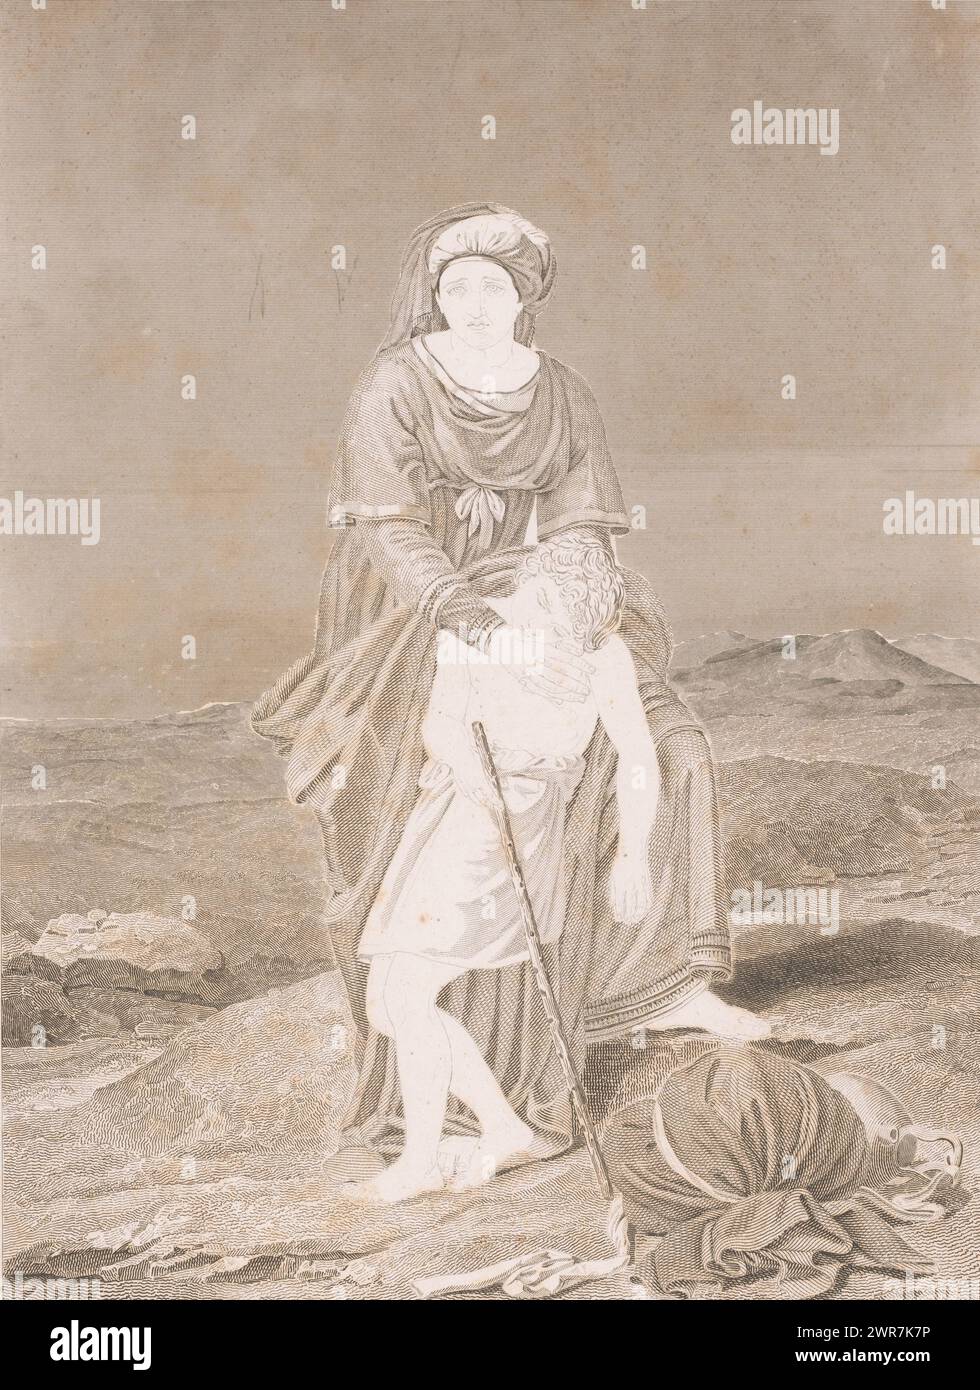 Hagar and Ishmael in the desert, print maker: Erin Corr, (attributed to), after painting by: François Joseph Navez, 1815 - 1862, paper, steel engraving, height 544 mm × width 397 mm, print Stock Photo